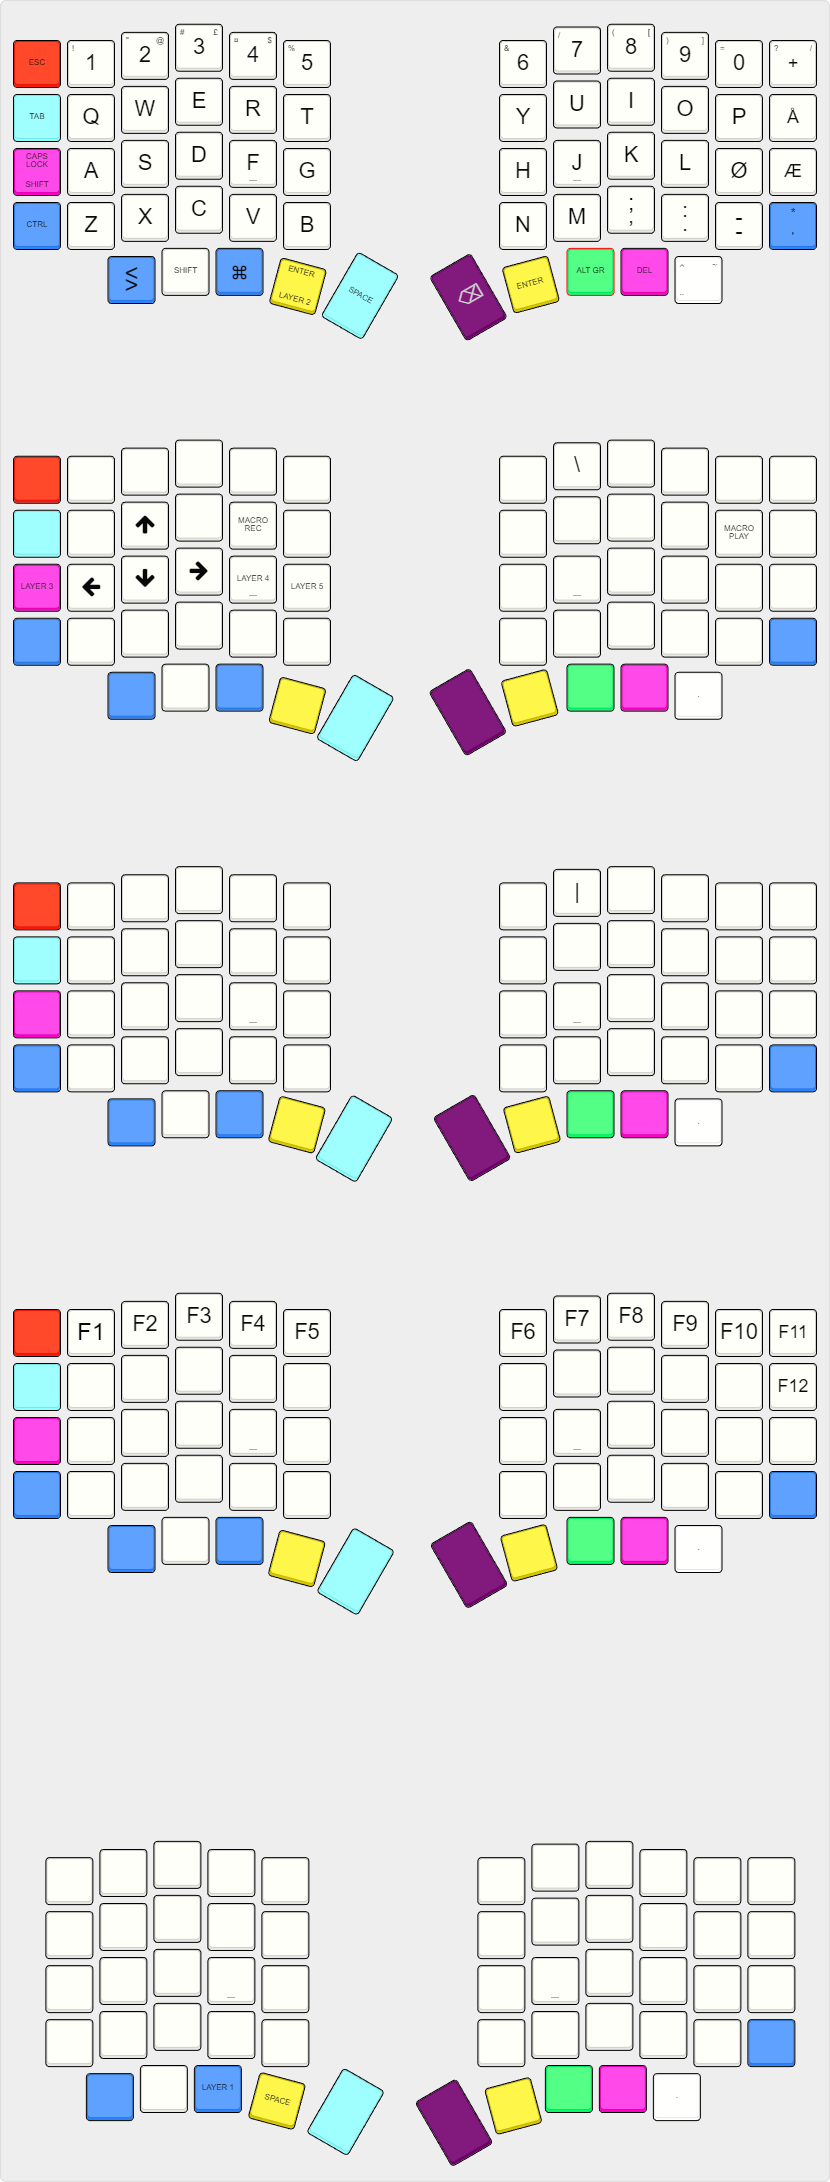 Layout of the keyboard